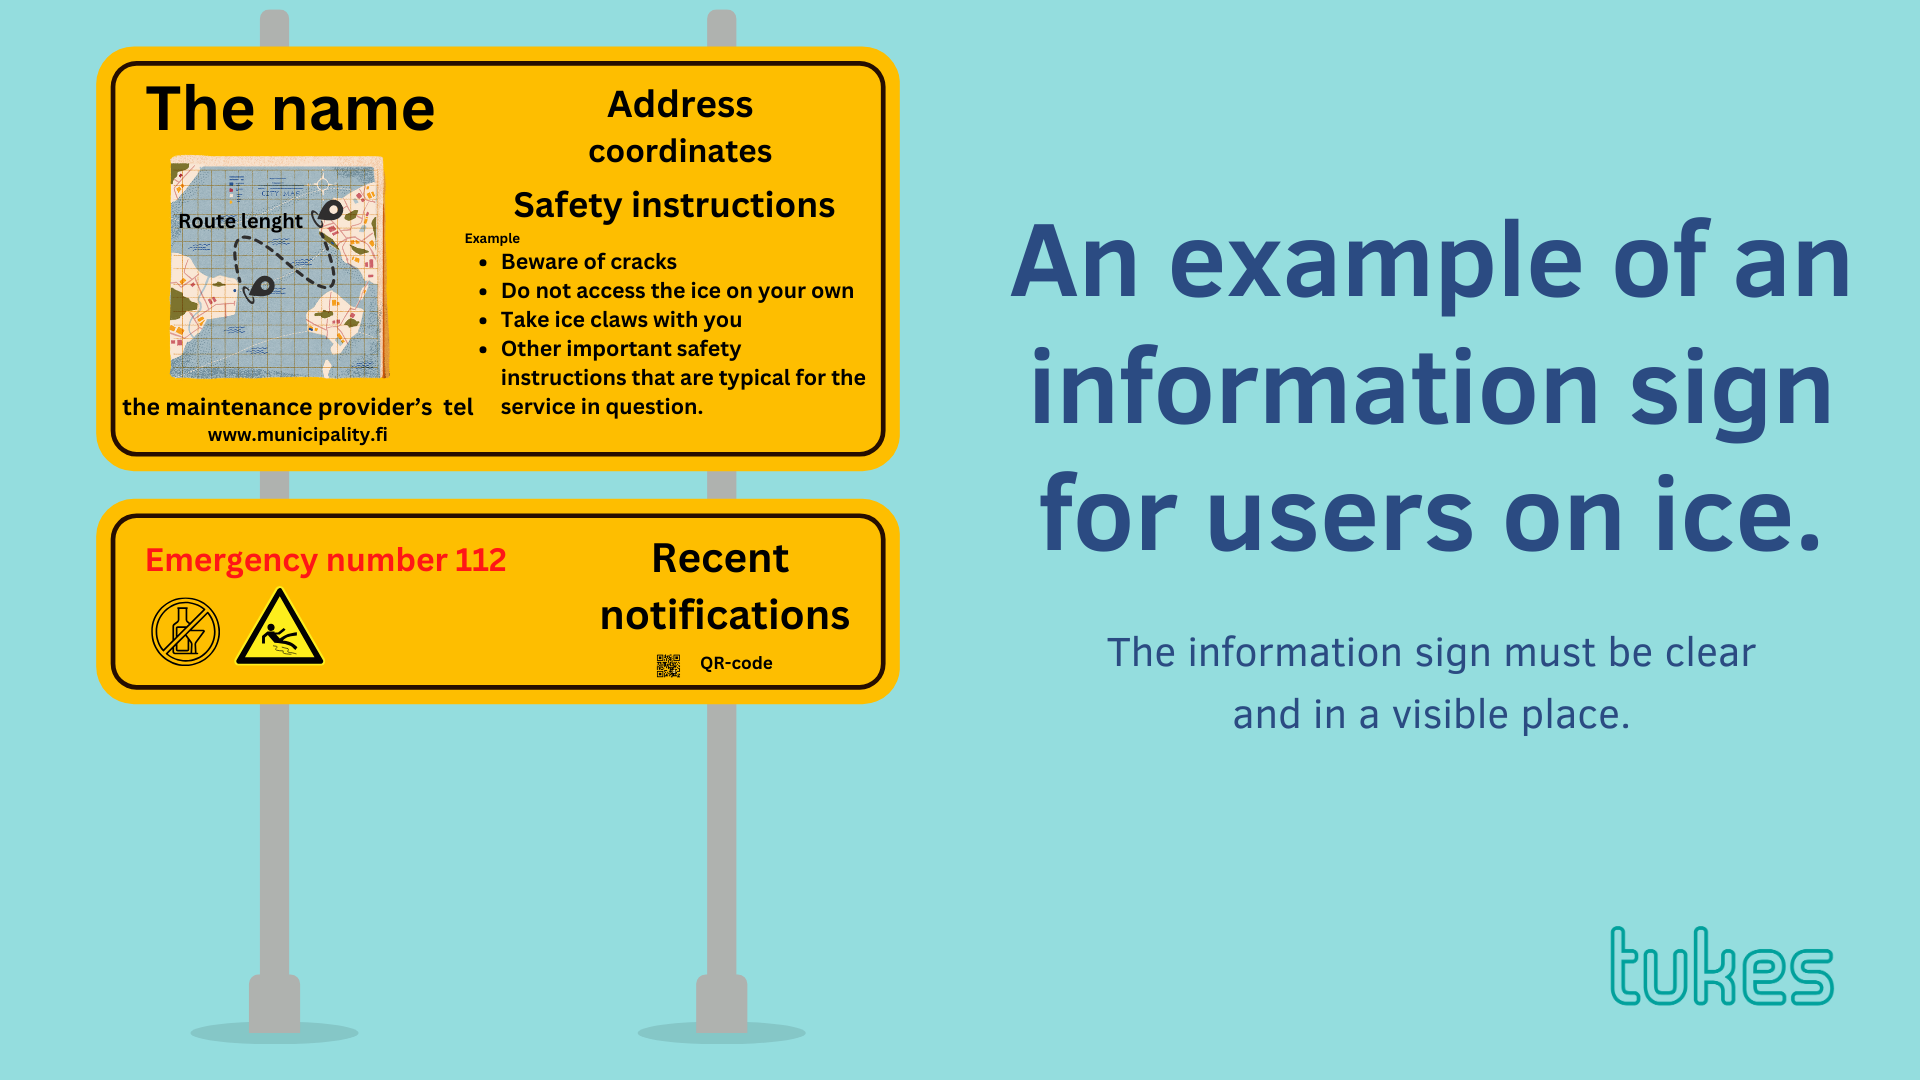 An example of an information sign for users on ice. The information sign must be clear and in a visible place.